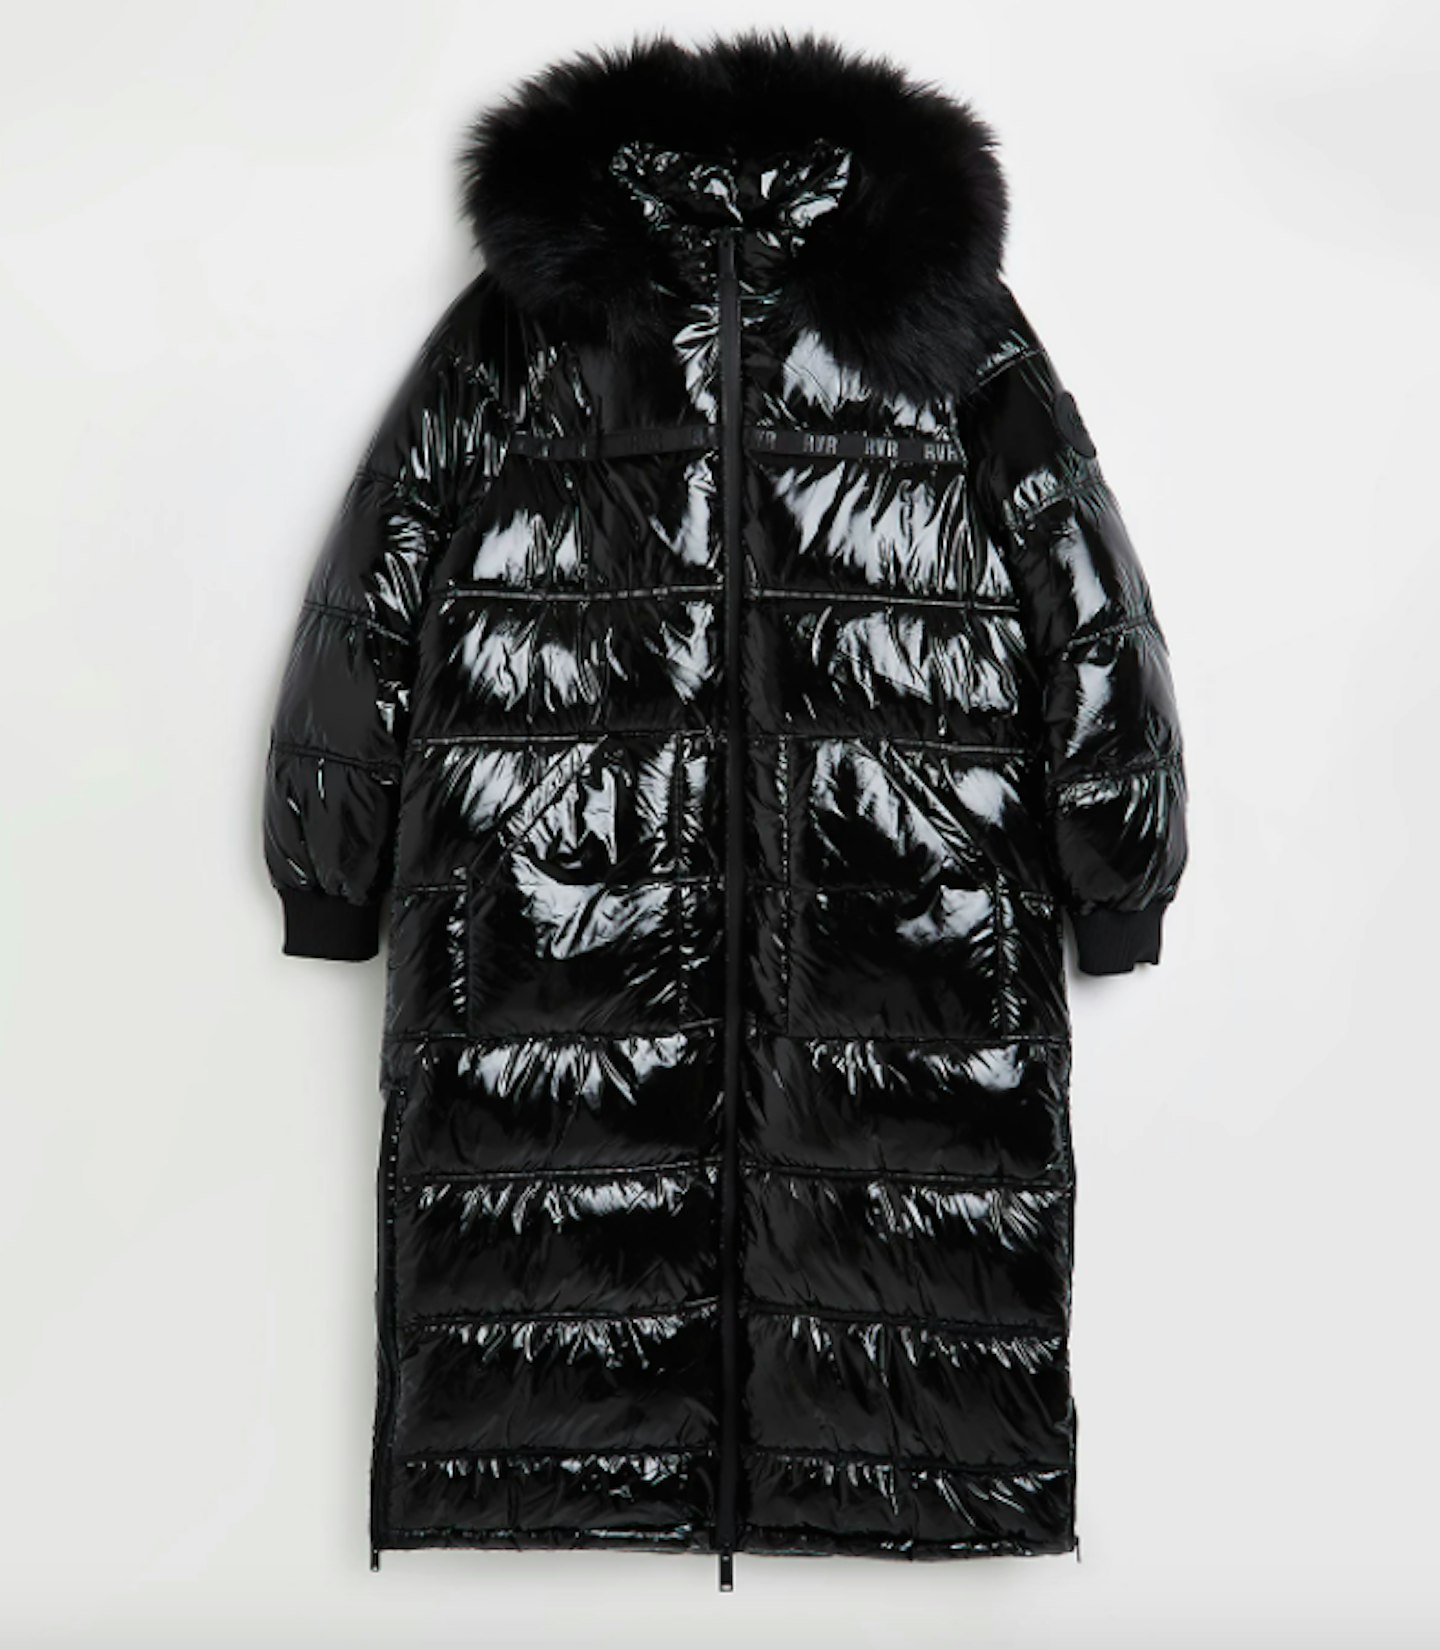 River Island, Black Patent Puffer Coat, WAS £115 NOW £70